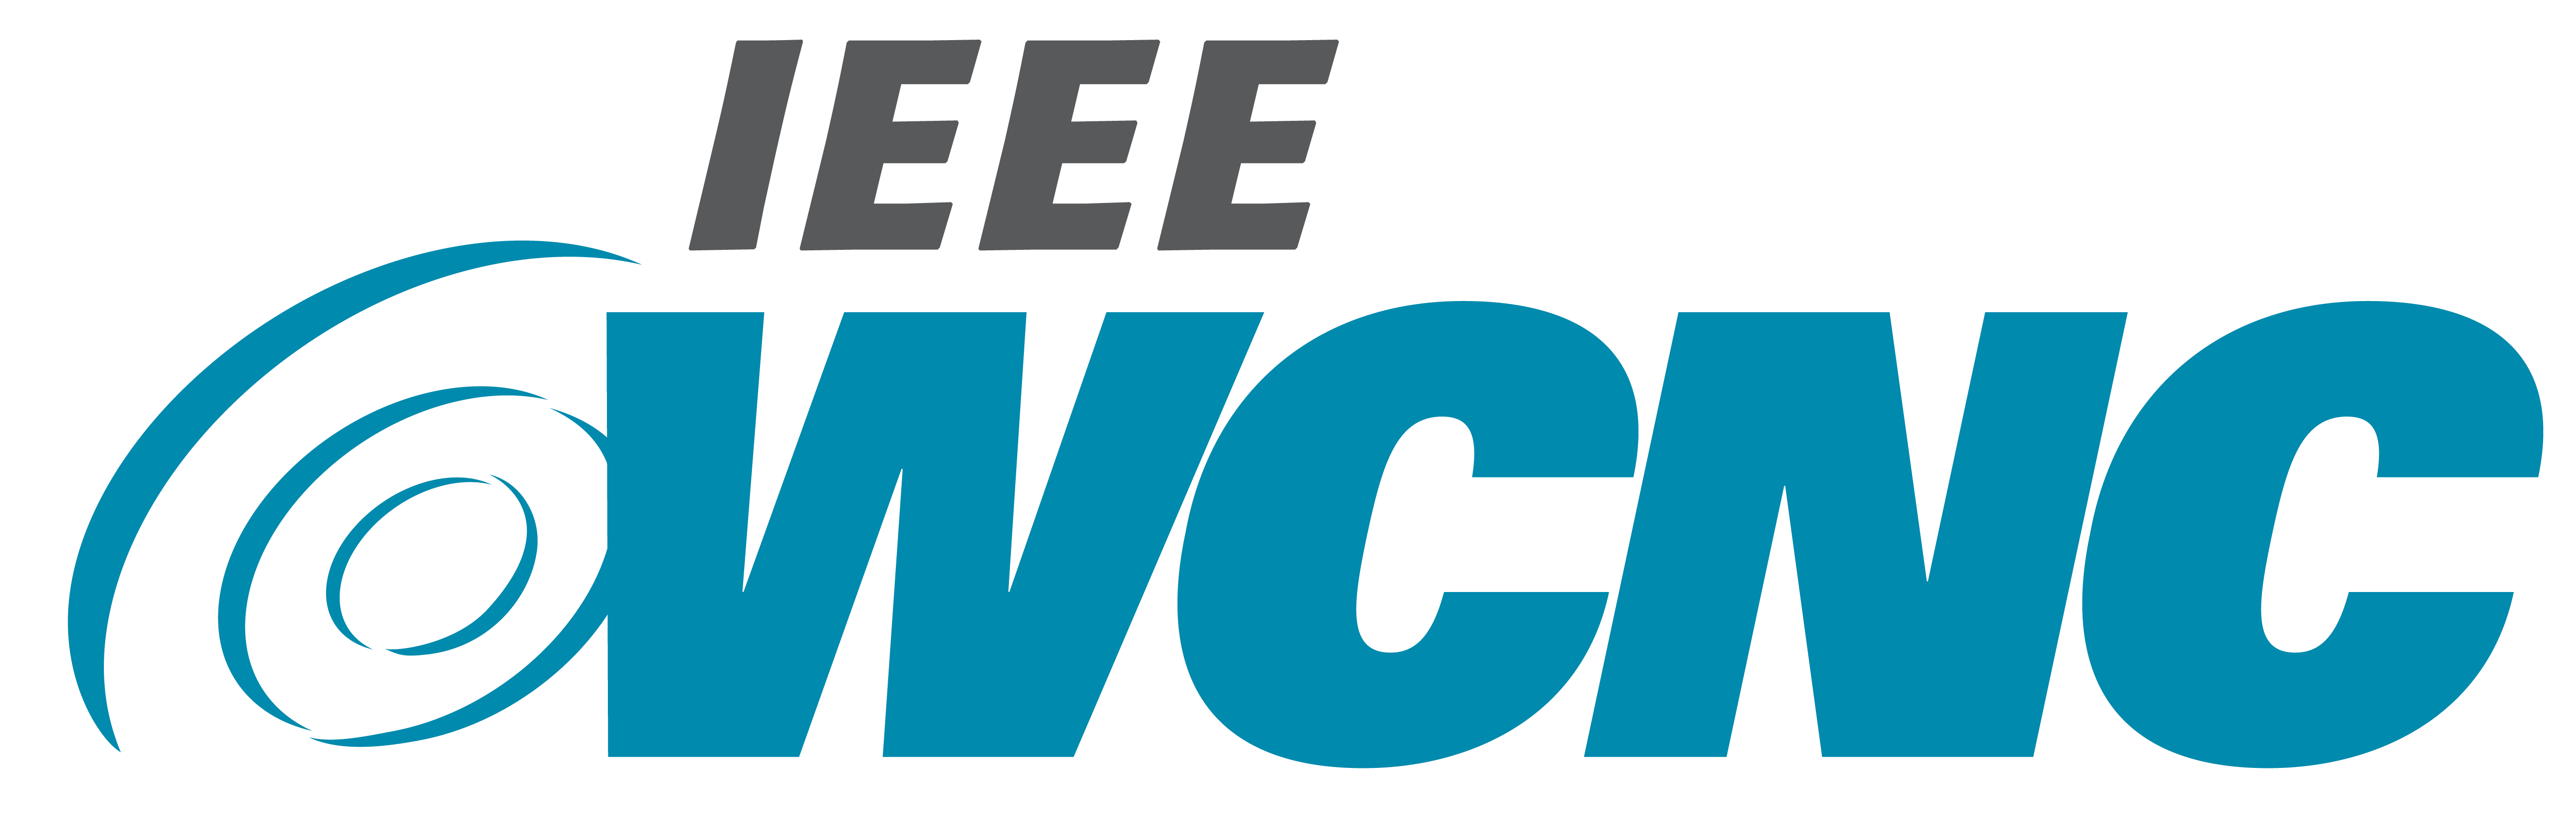 Wireless Communications Logo - WCNC. IEEE Wireless Communications and Networking Conference